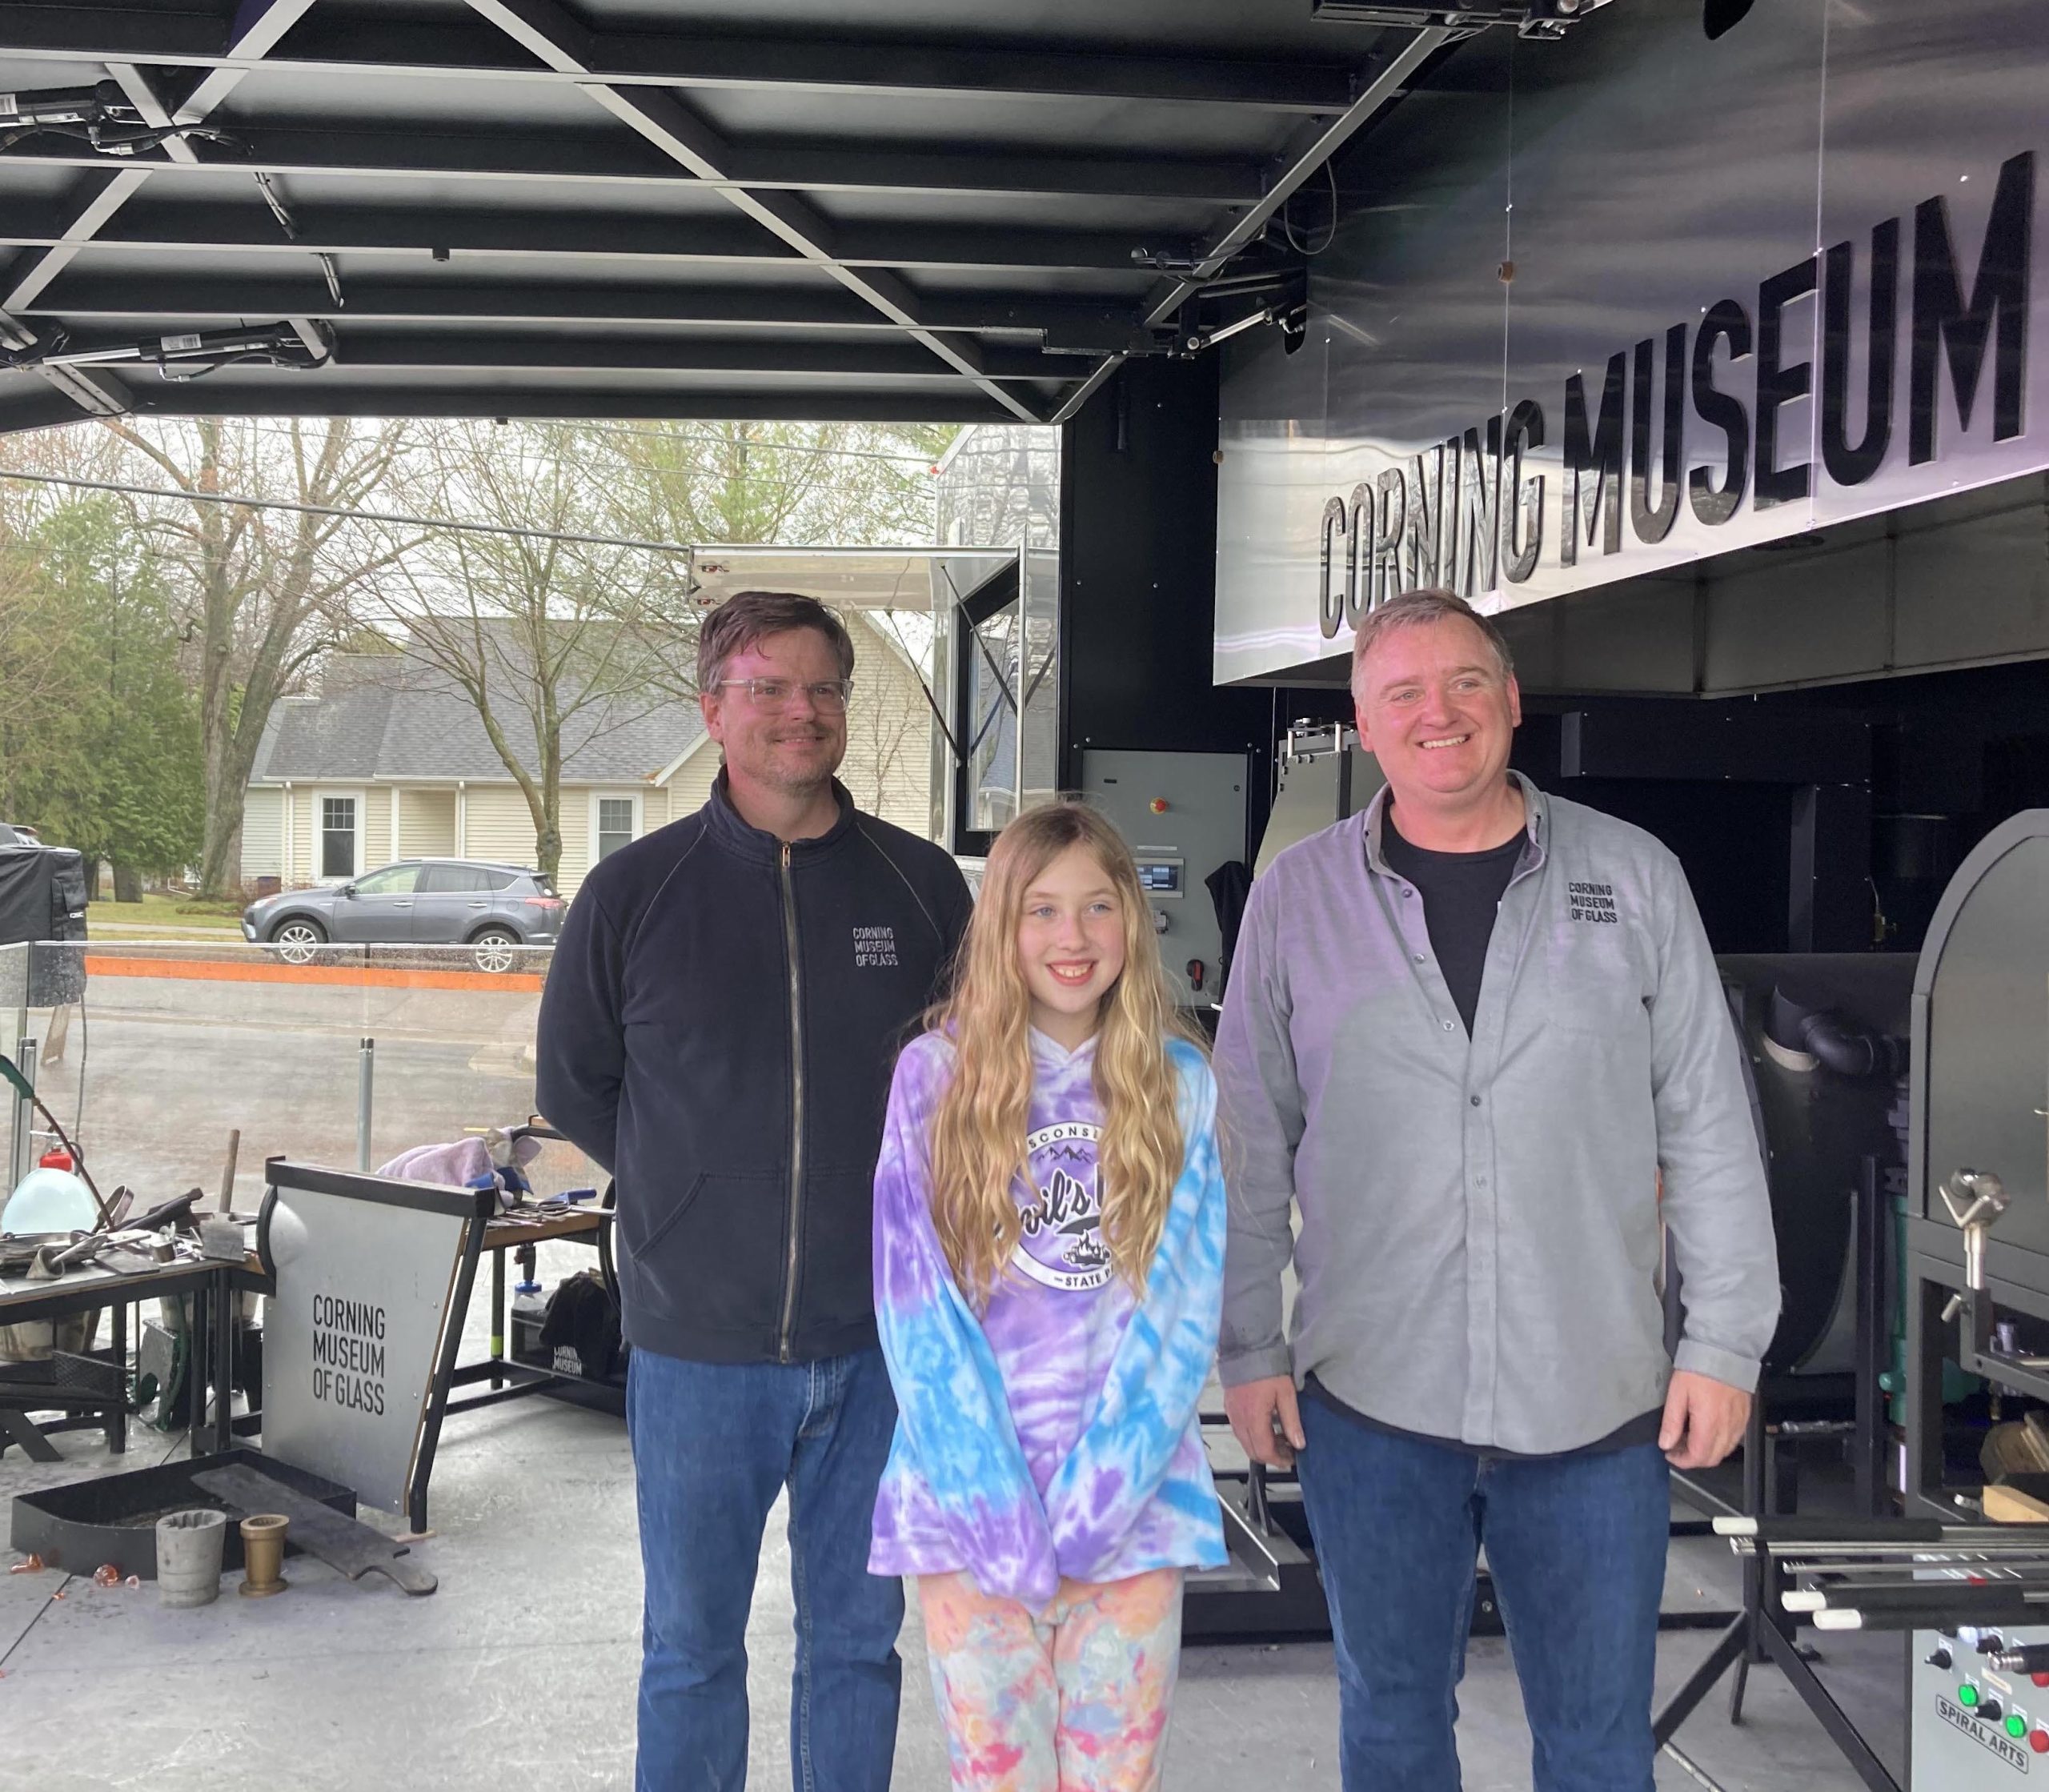 Child artist photographed with Jeff Mack and George Kennard on the Mobile Hot Shop stage.